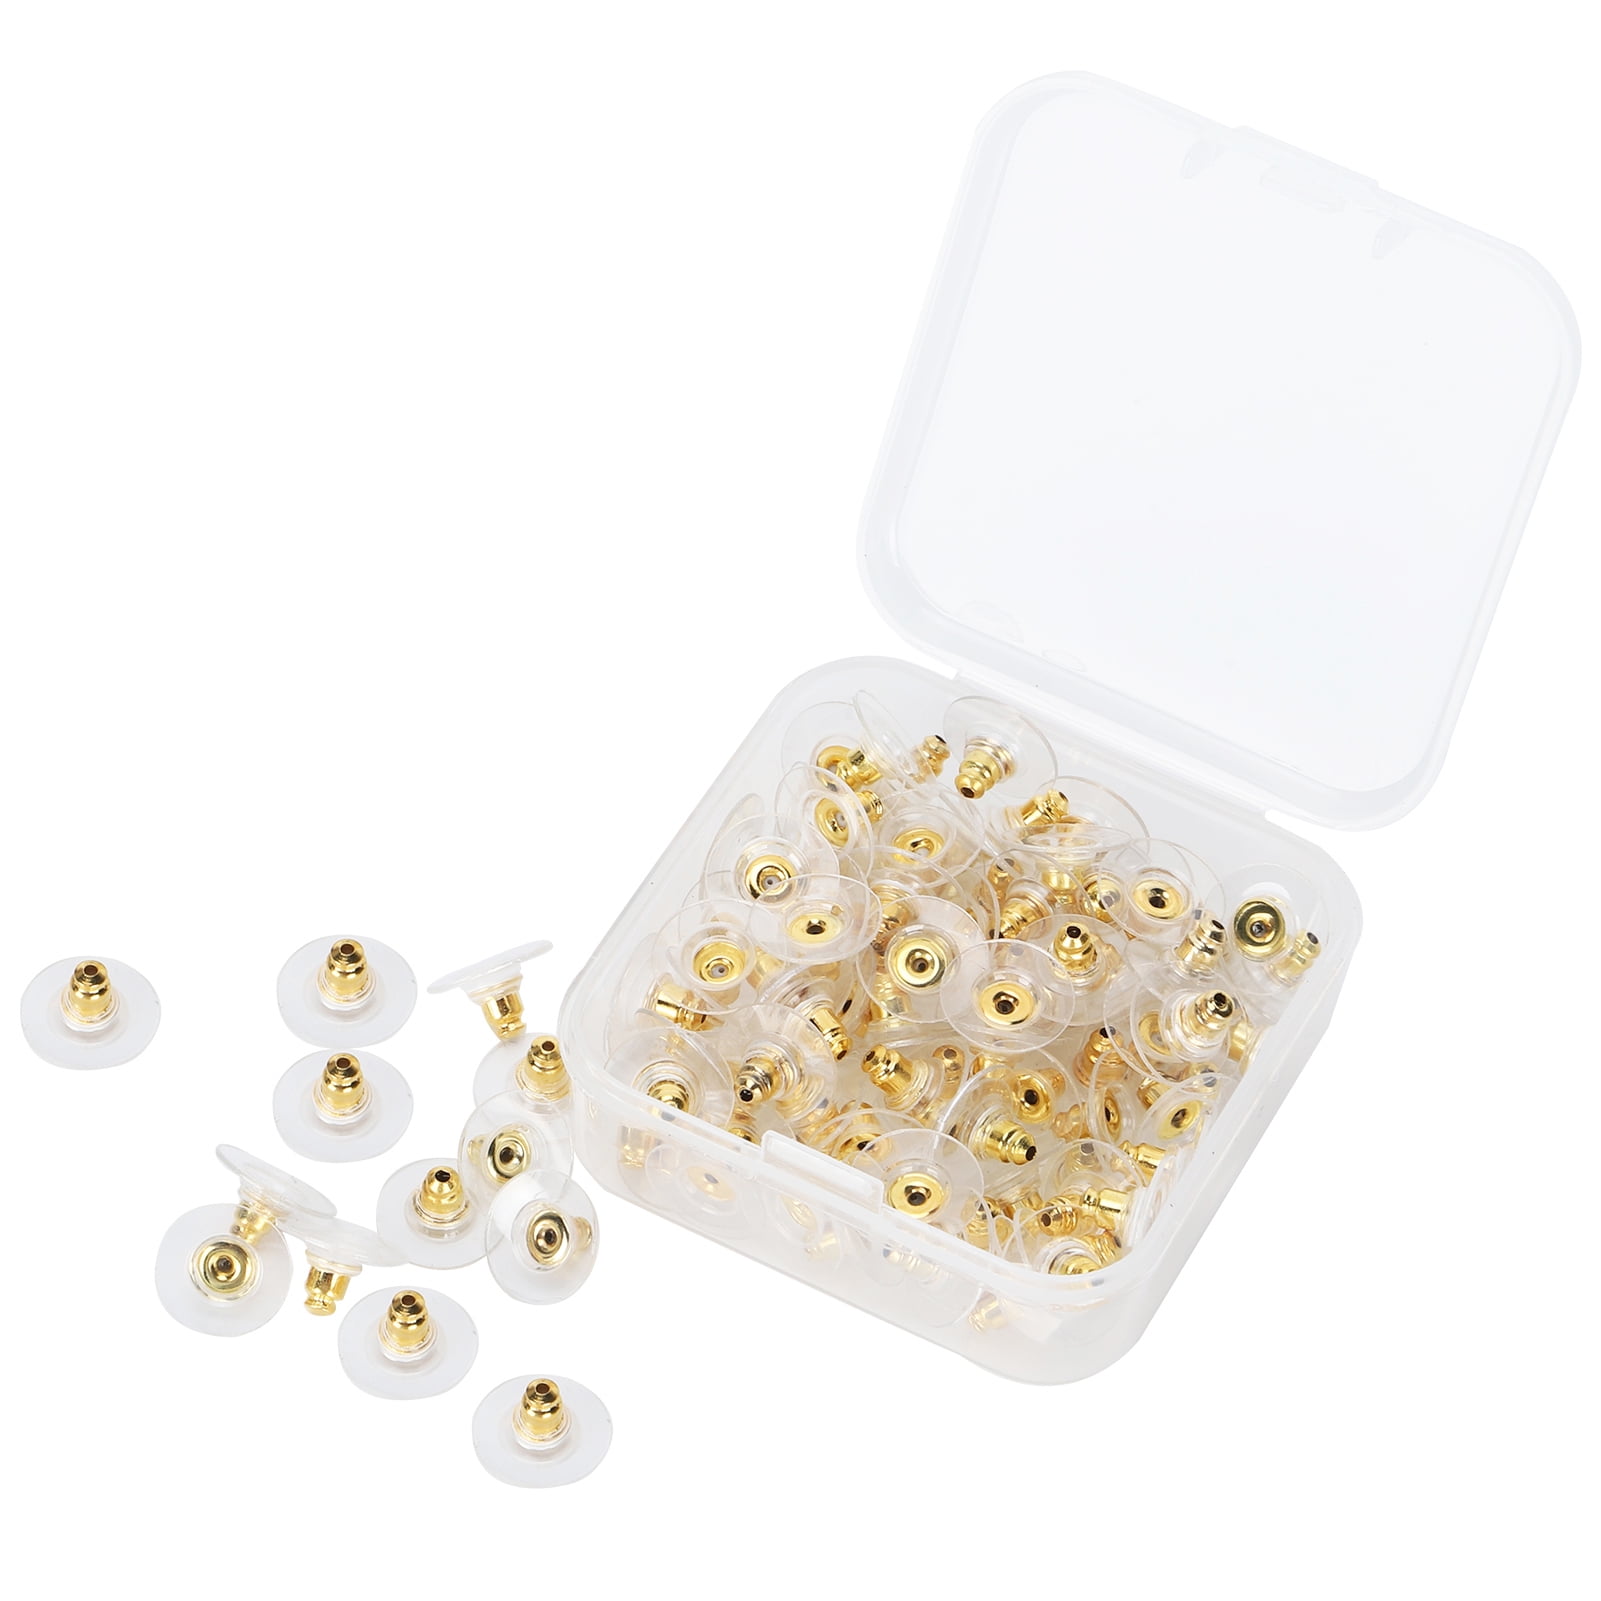 Pierced Earring Backing Stoppers Earring Backs Plastic Comfortable 100  Pcsbox For DIY Crafts For Bracelets For Earrings For Necklaces  Walmart com